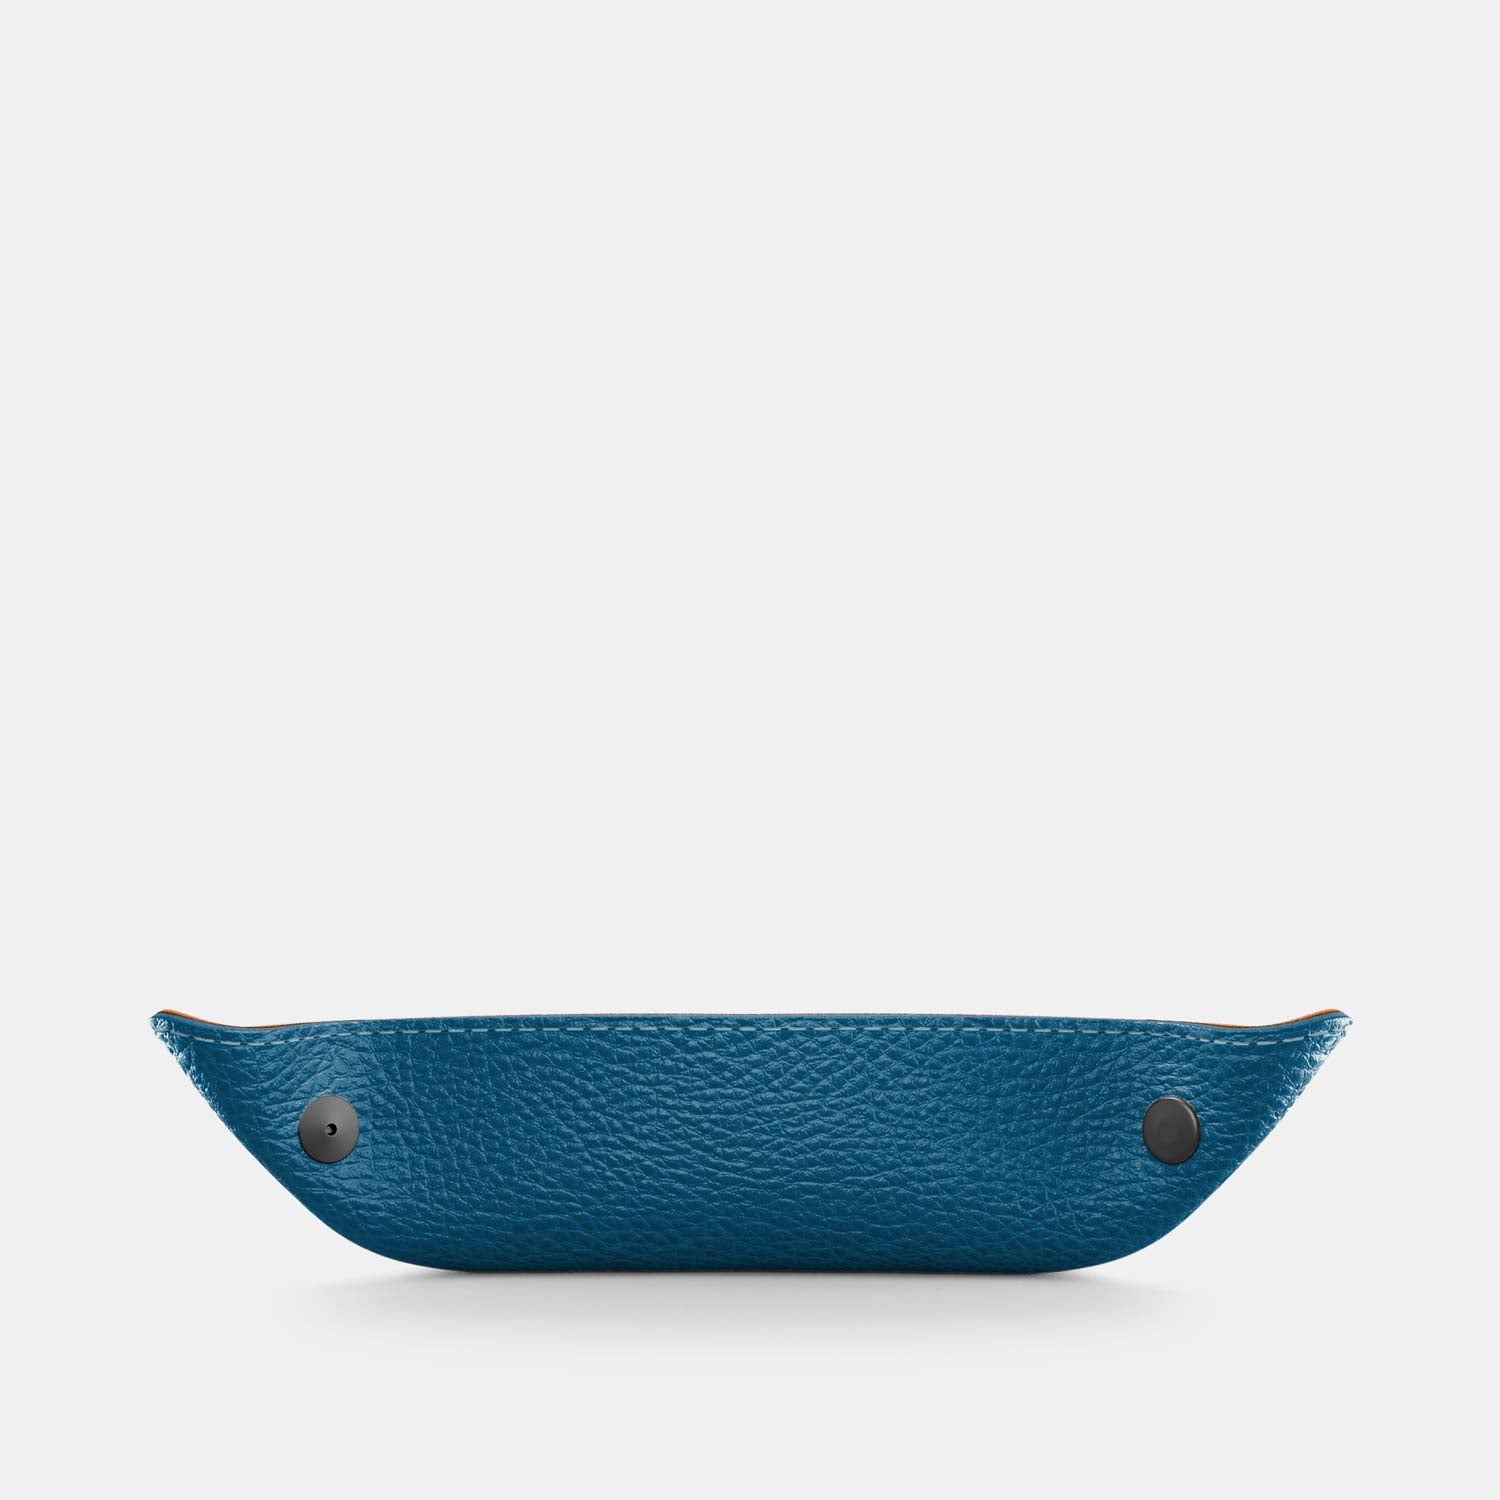 Leather Catch-all Tray - Turquoise Blue and Orange - RYAN London